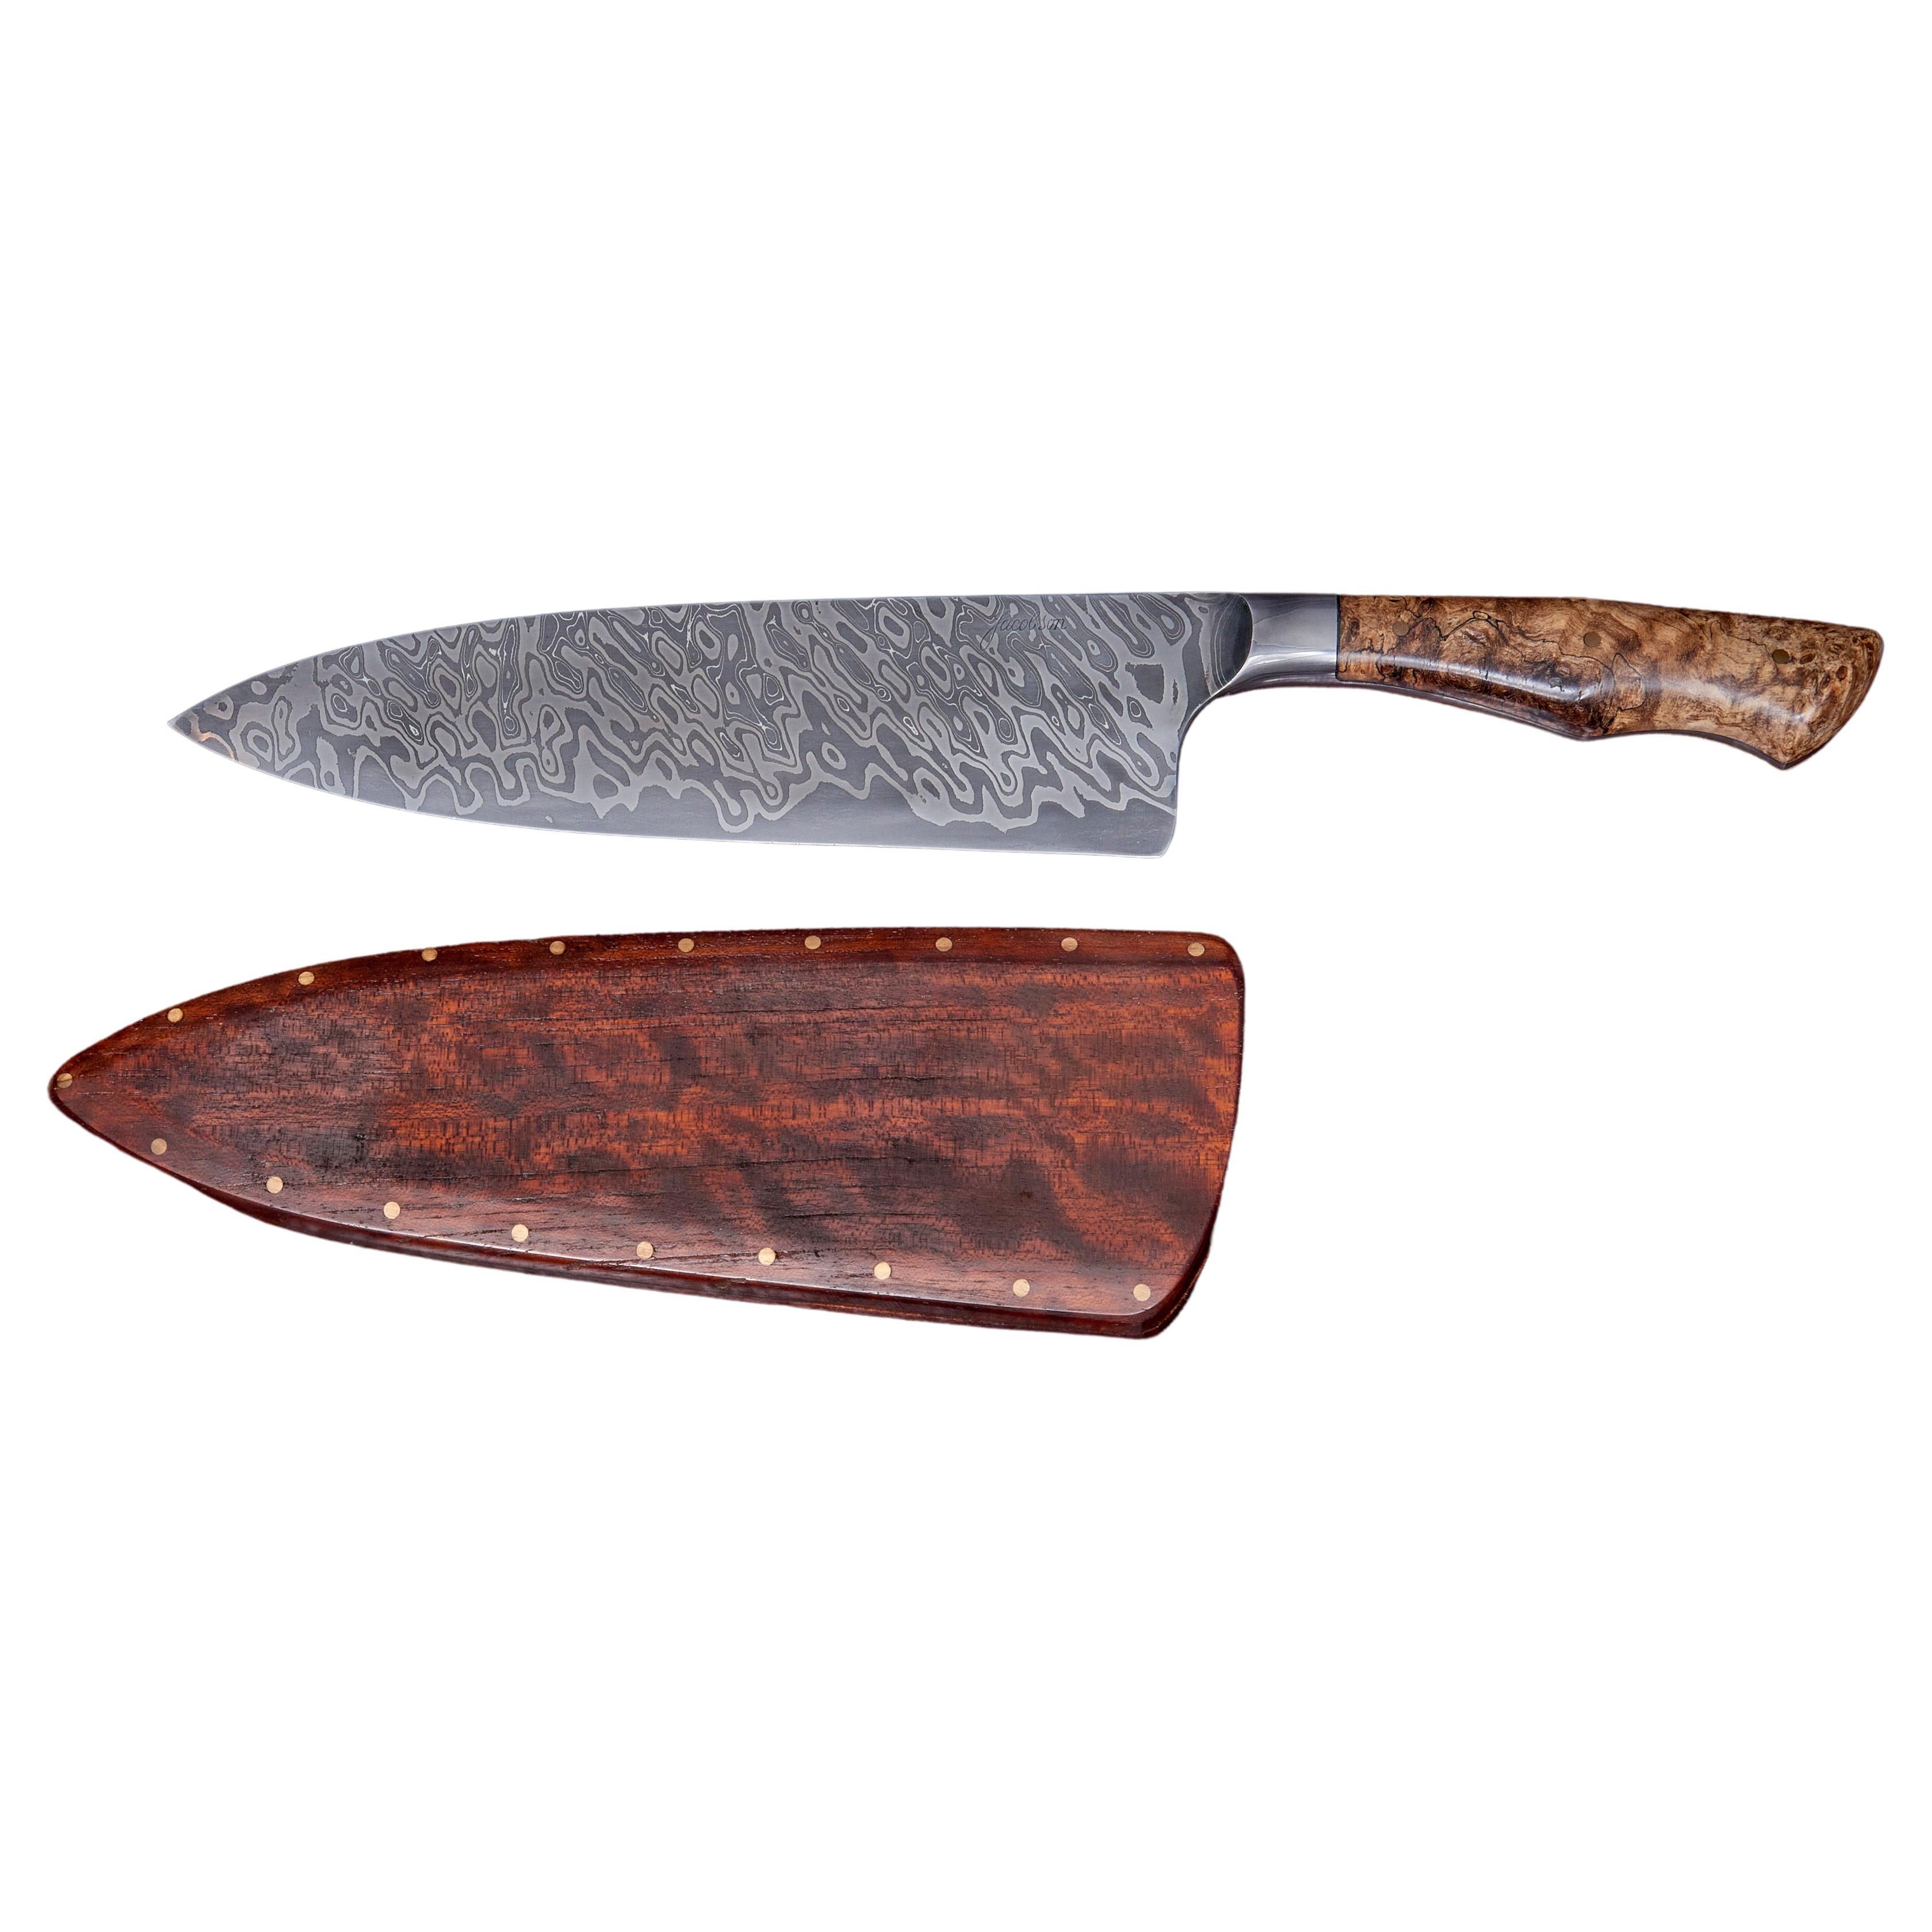 Dave Jacobson Knife with Hickory Handle, USA - 2023 For Sale